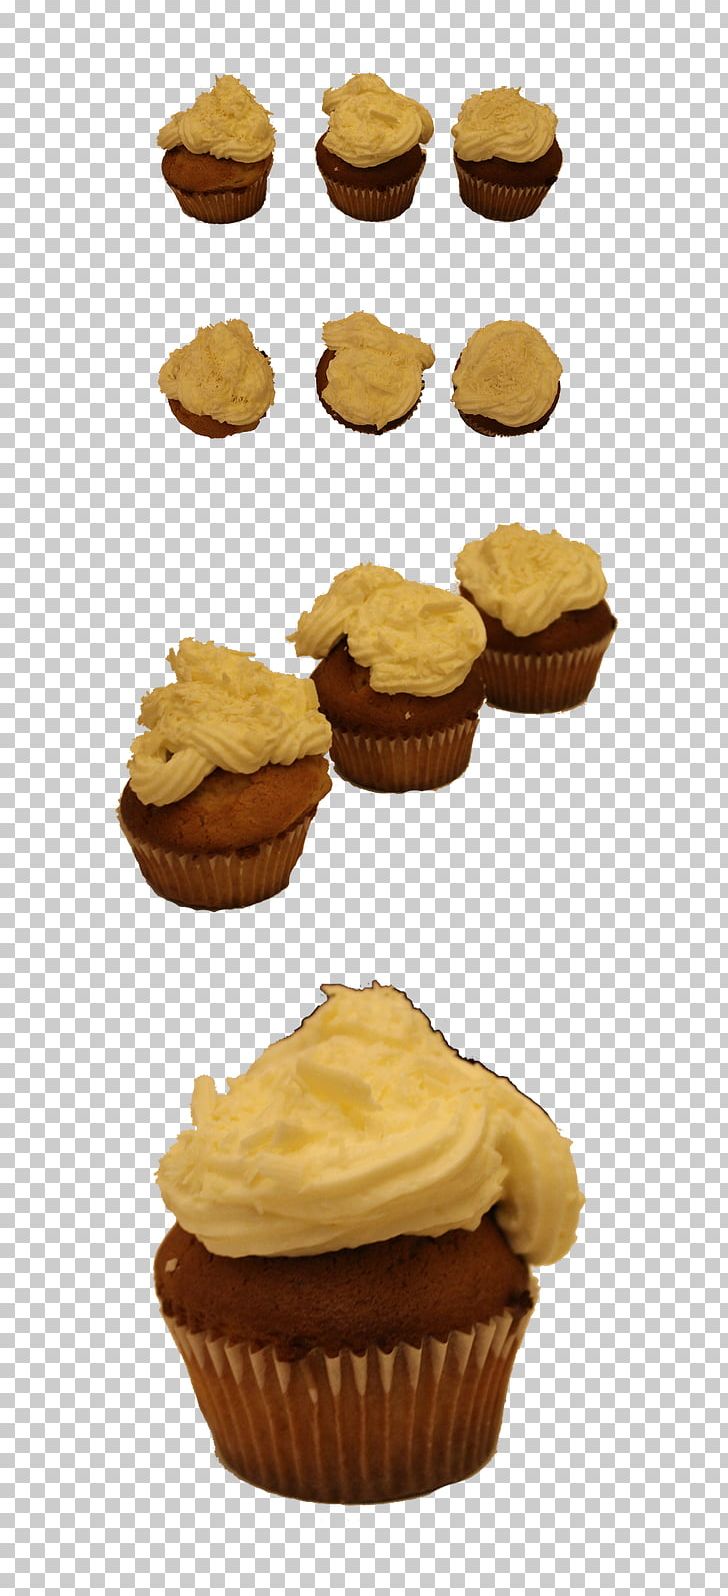 Cupcake Peanut Butter Cup Muffin Buttercream Flavor PNG, Clipart, Baking, Buttercream, Cake, Cup, Cupcake Free PNG Download